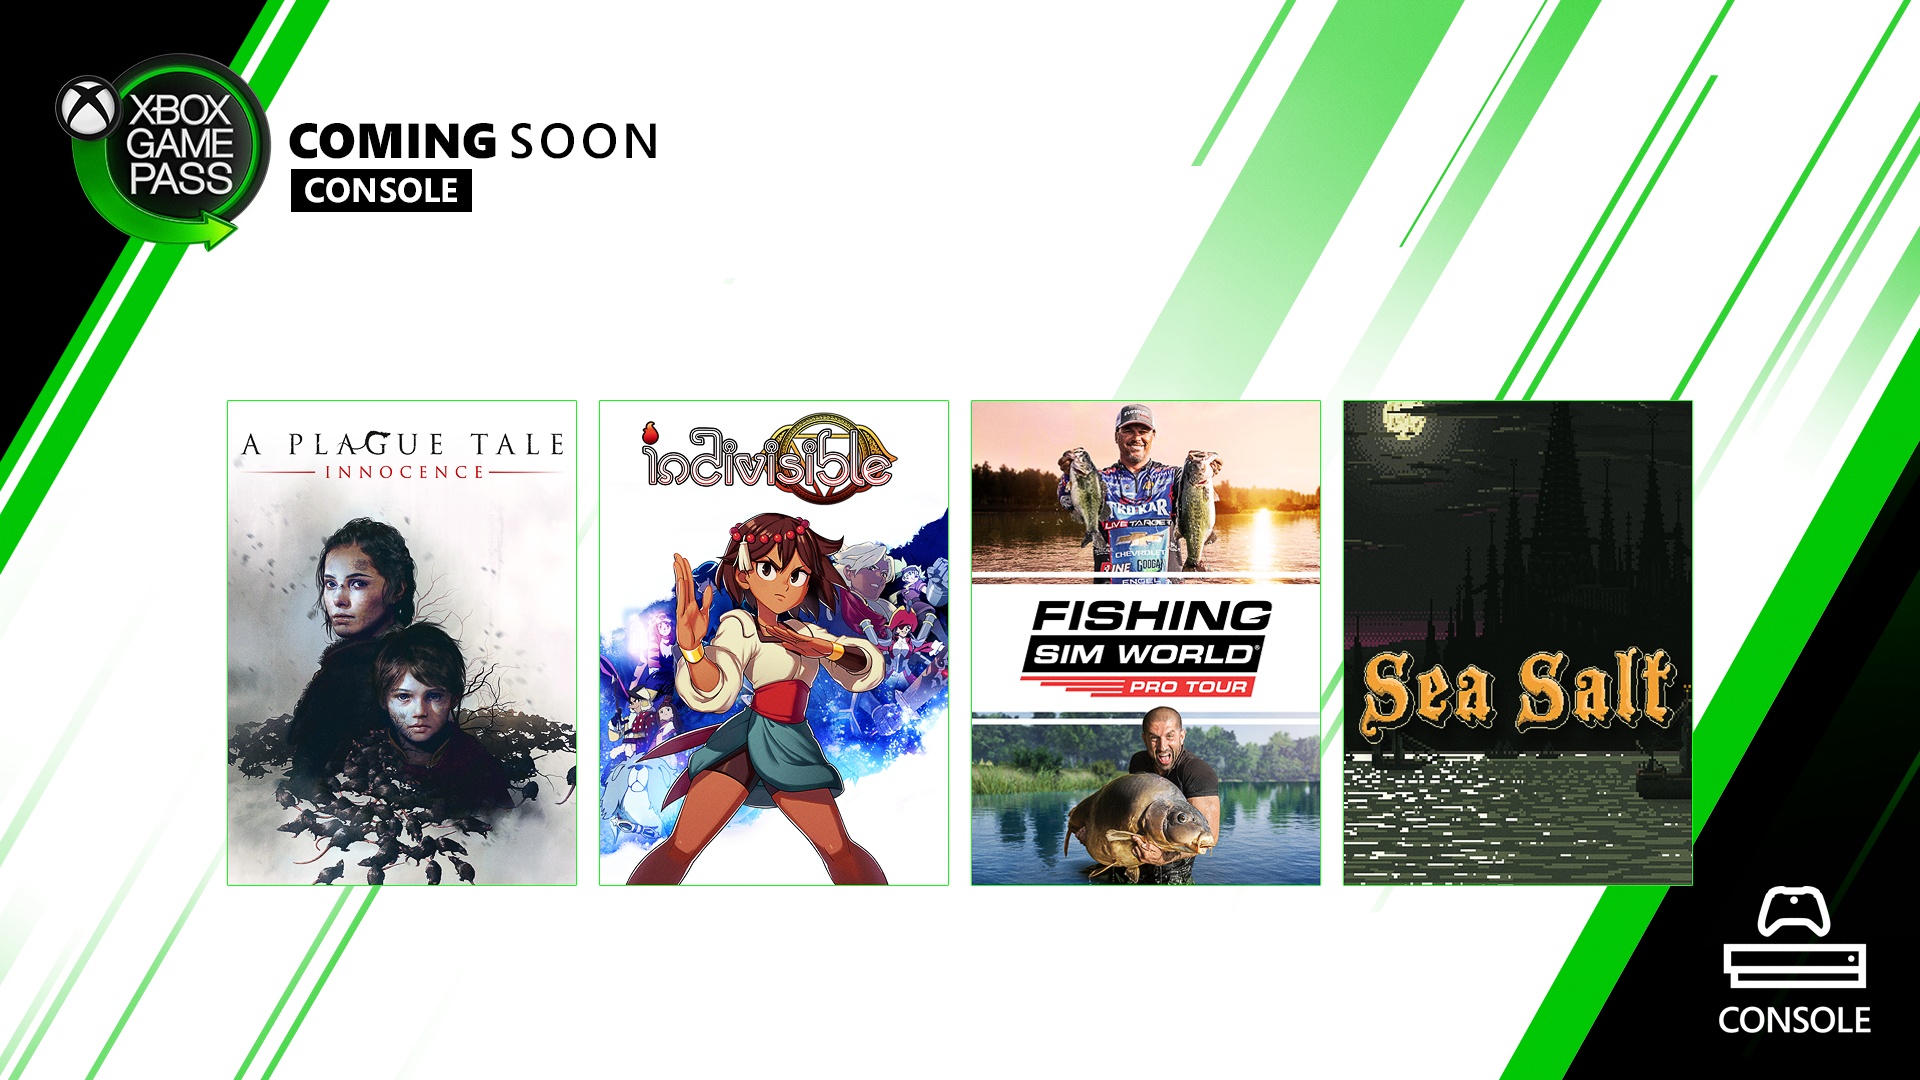 games coming soon to xbox game pass